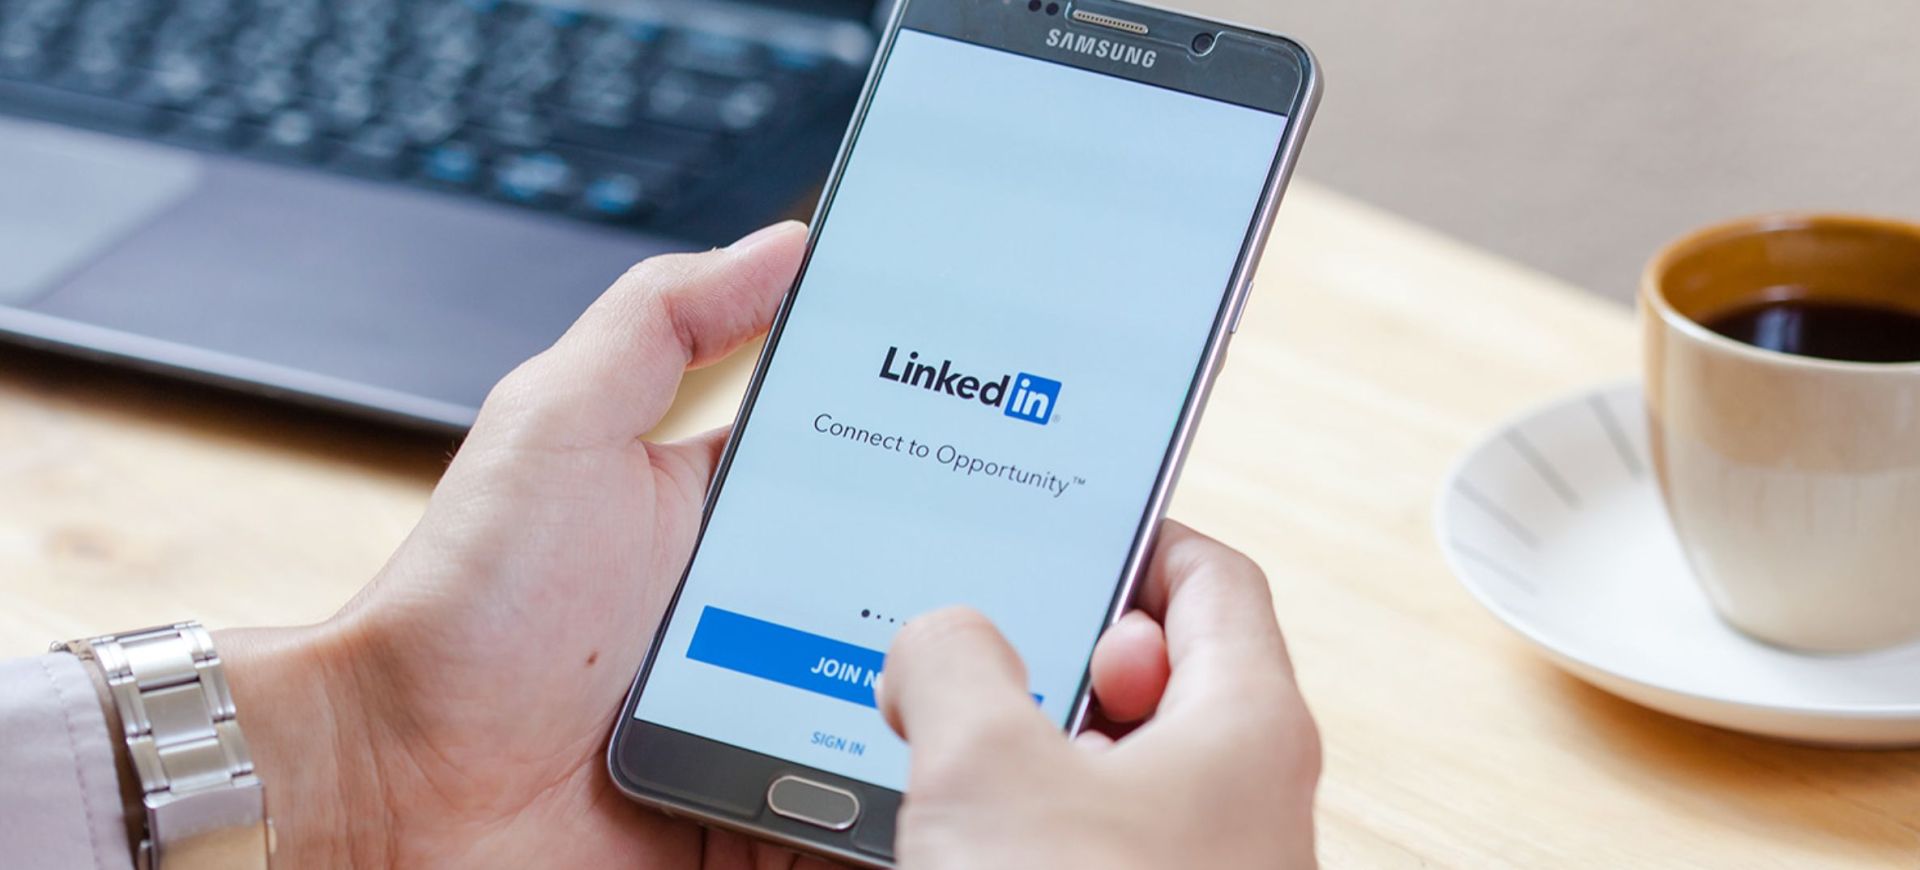 Optimising Your Business’s LinkedIn Profile (For Free)